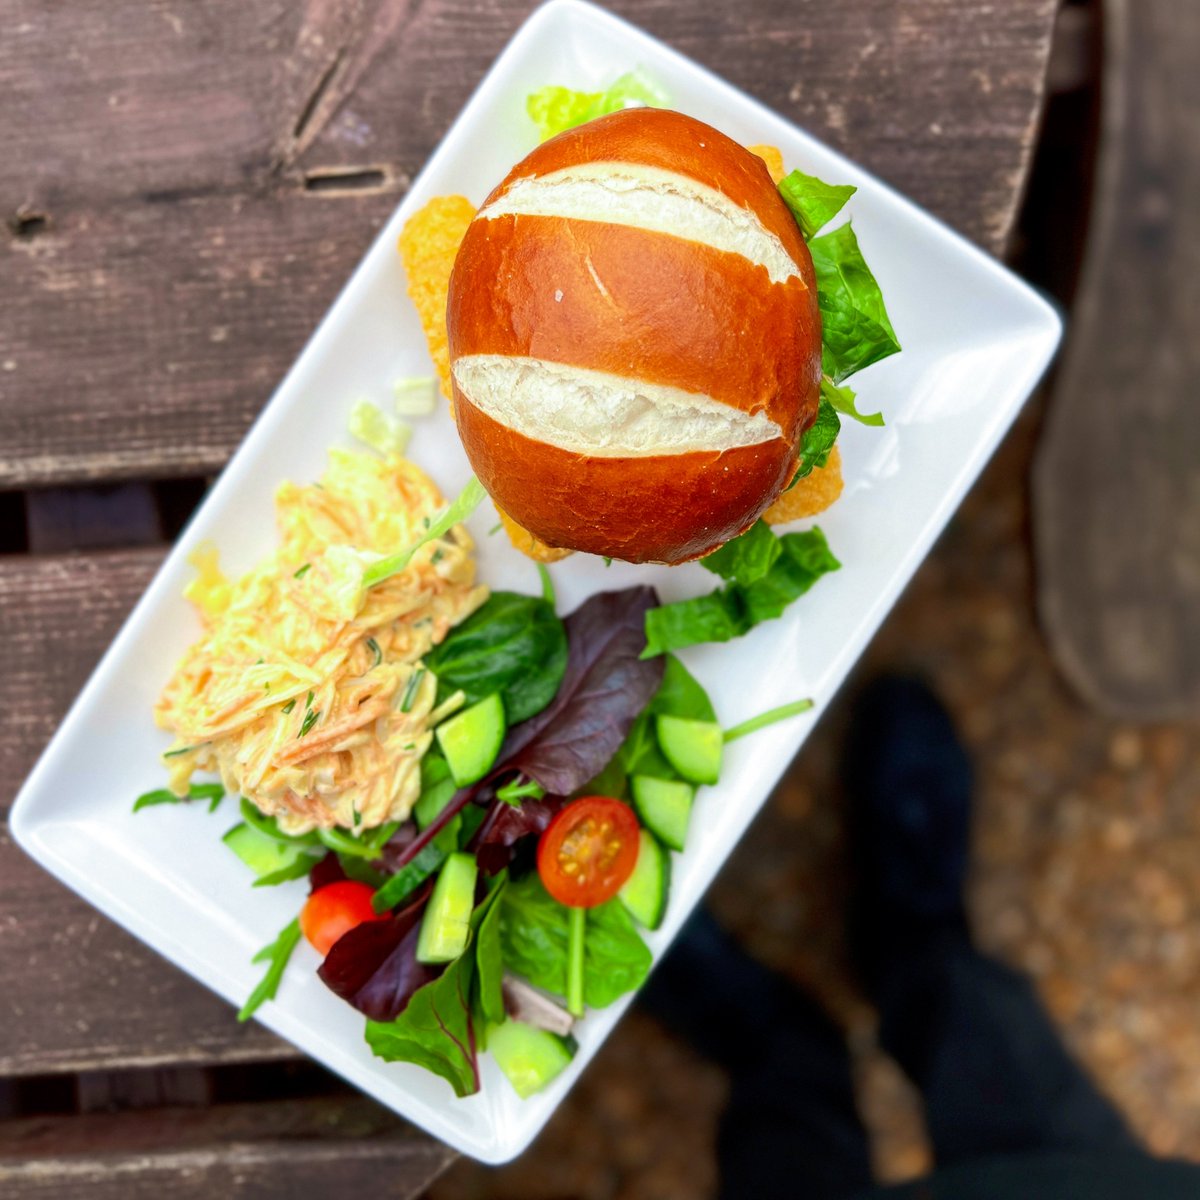 Osterley’s Stables Café has a new item on the menu... Introducing the Fish Finger Pretzel Roll topped with homemade tartar sauce, lettuce and on the side, salad and slaw (a.k.a Coleslaw). Added to the weekend menu, head to our café today for a tasty bite!🤩 📷Dan Filipov